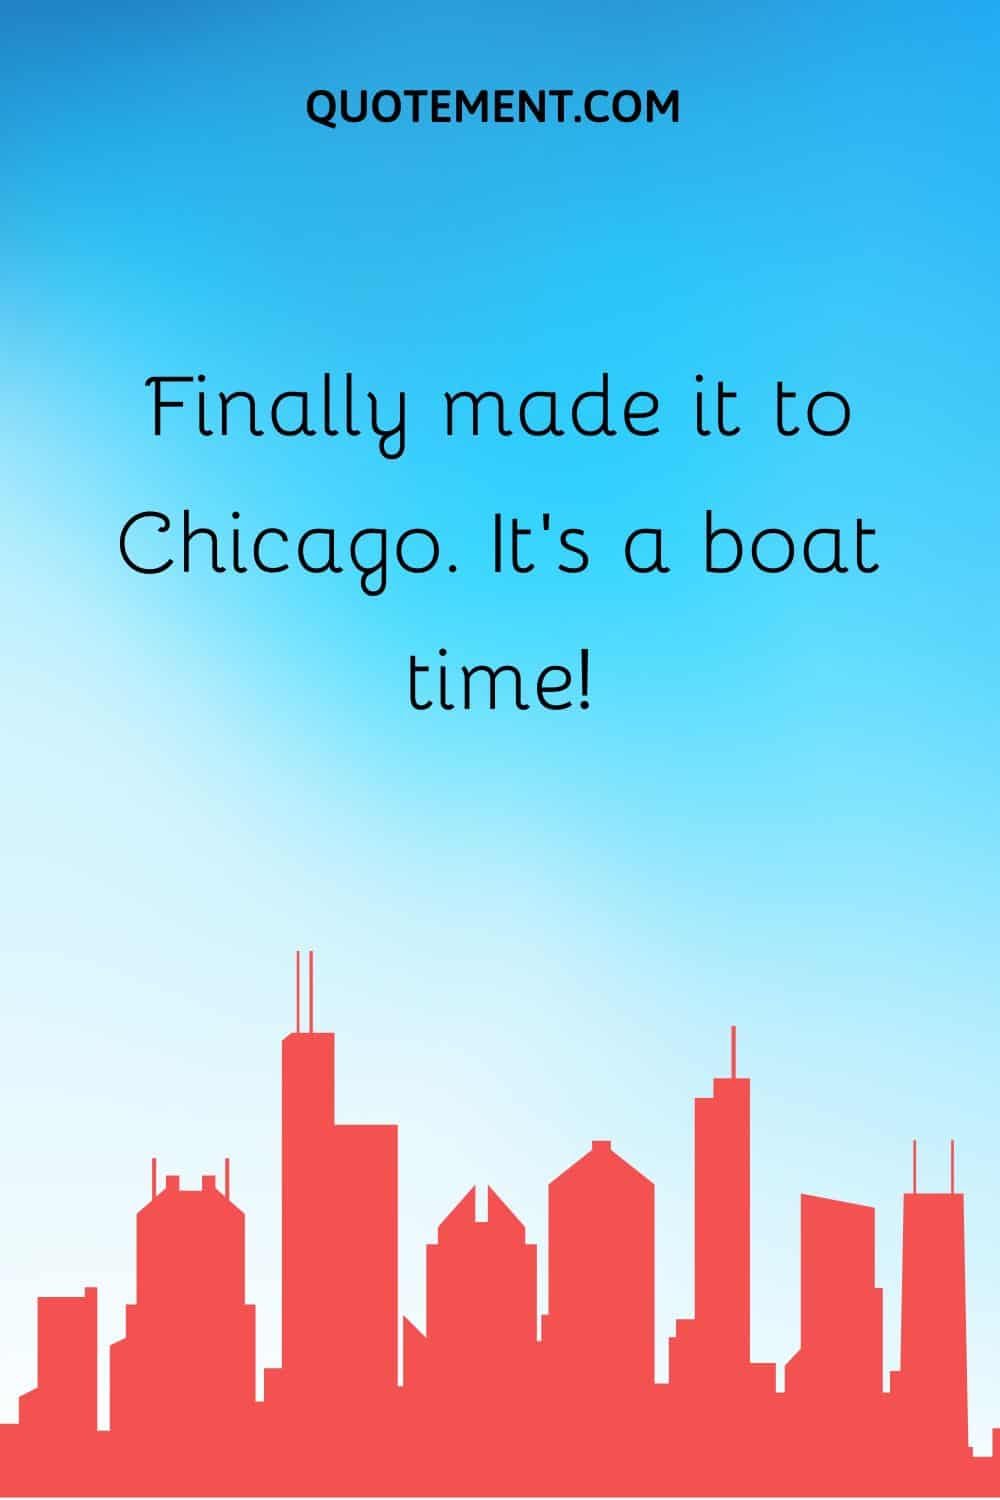 Finally made it to Chicago. It’s a boat time!